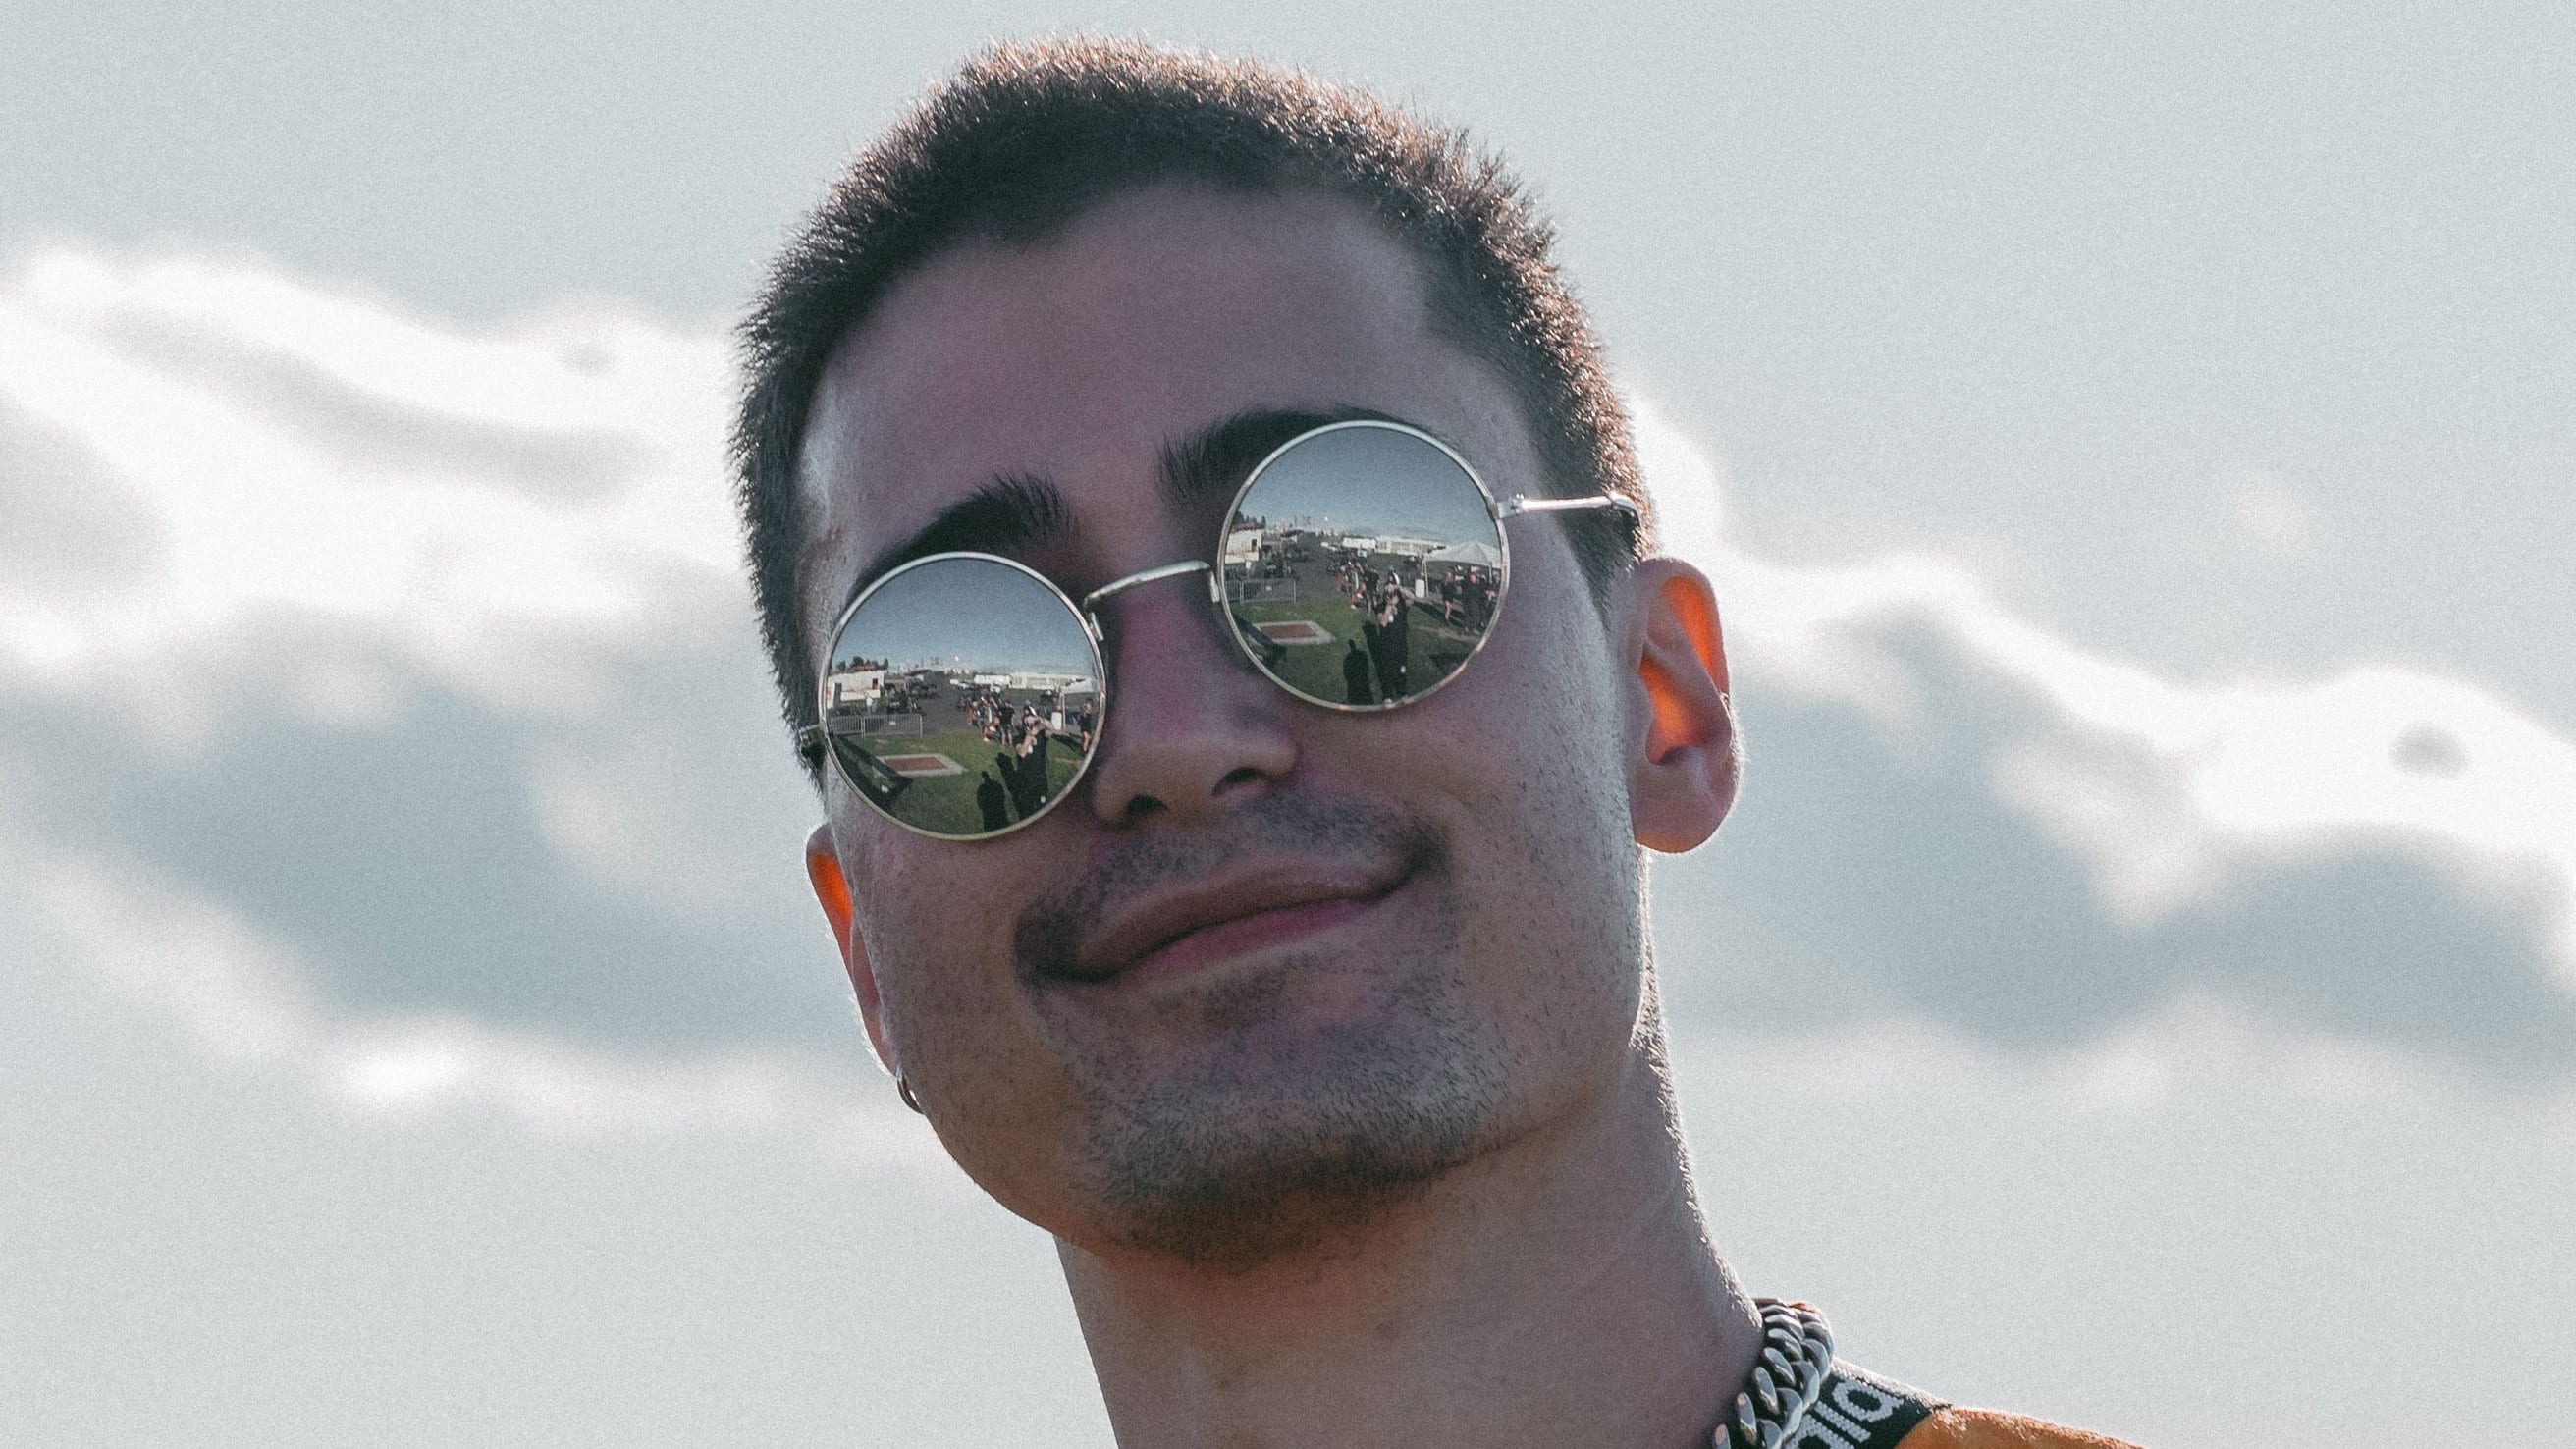 FISHER Stuns with New Track, FREAKS -  - The Latest Electronic  Dance Music News, Reviews & Artists